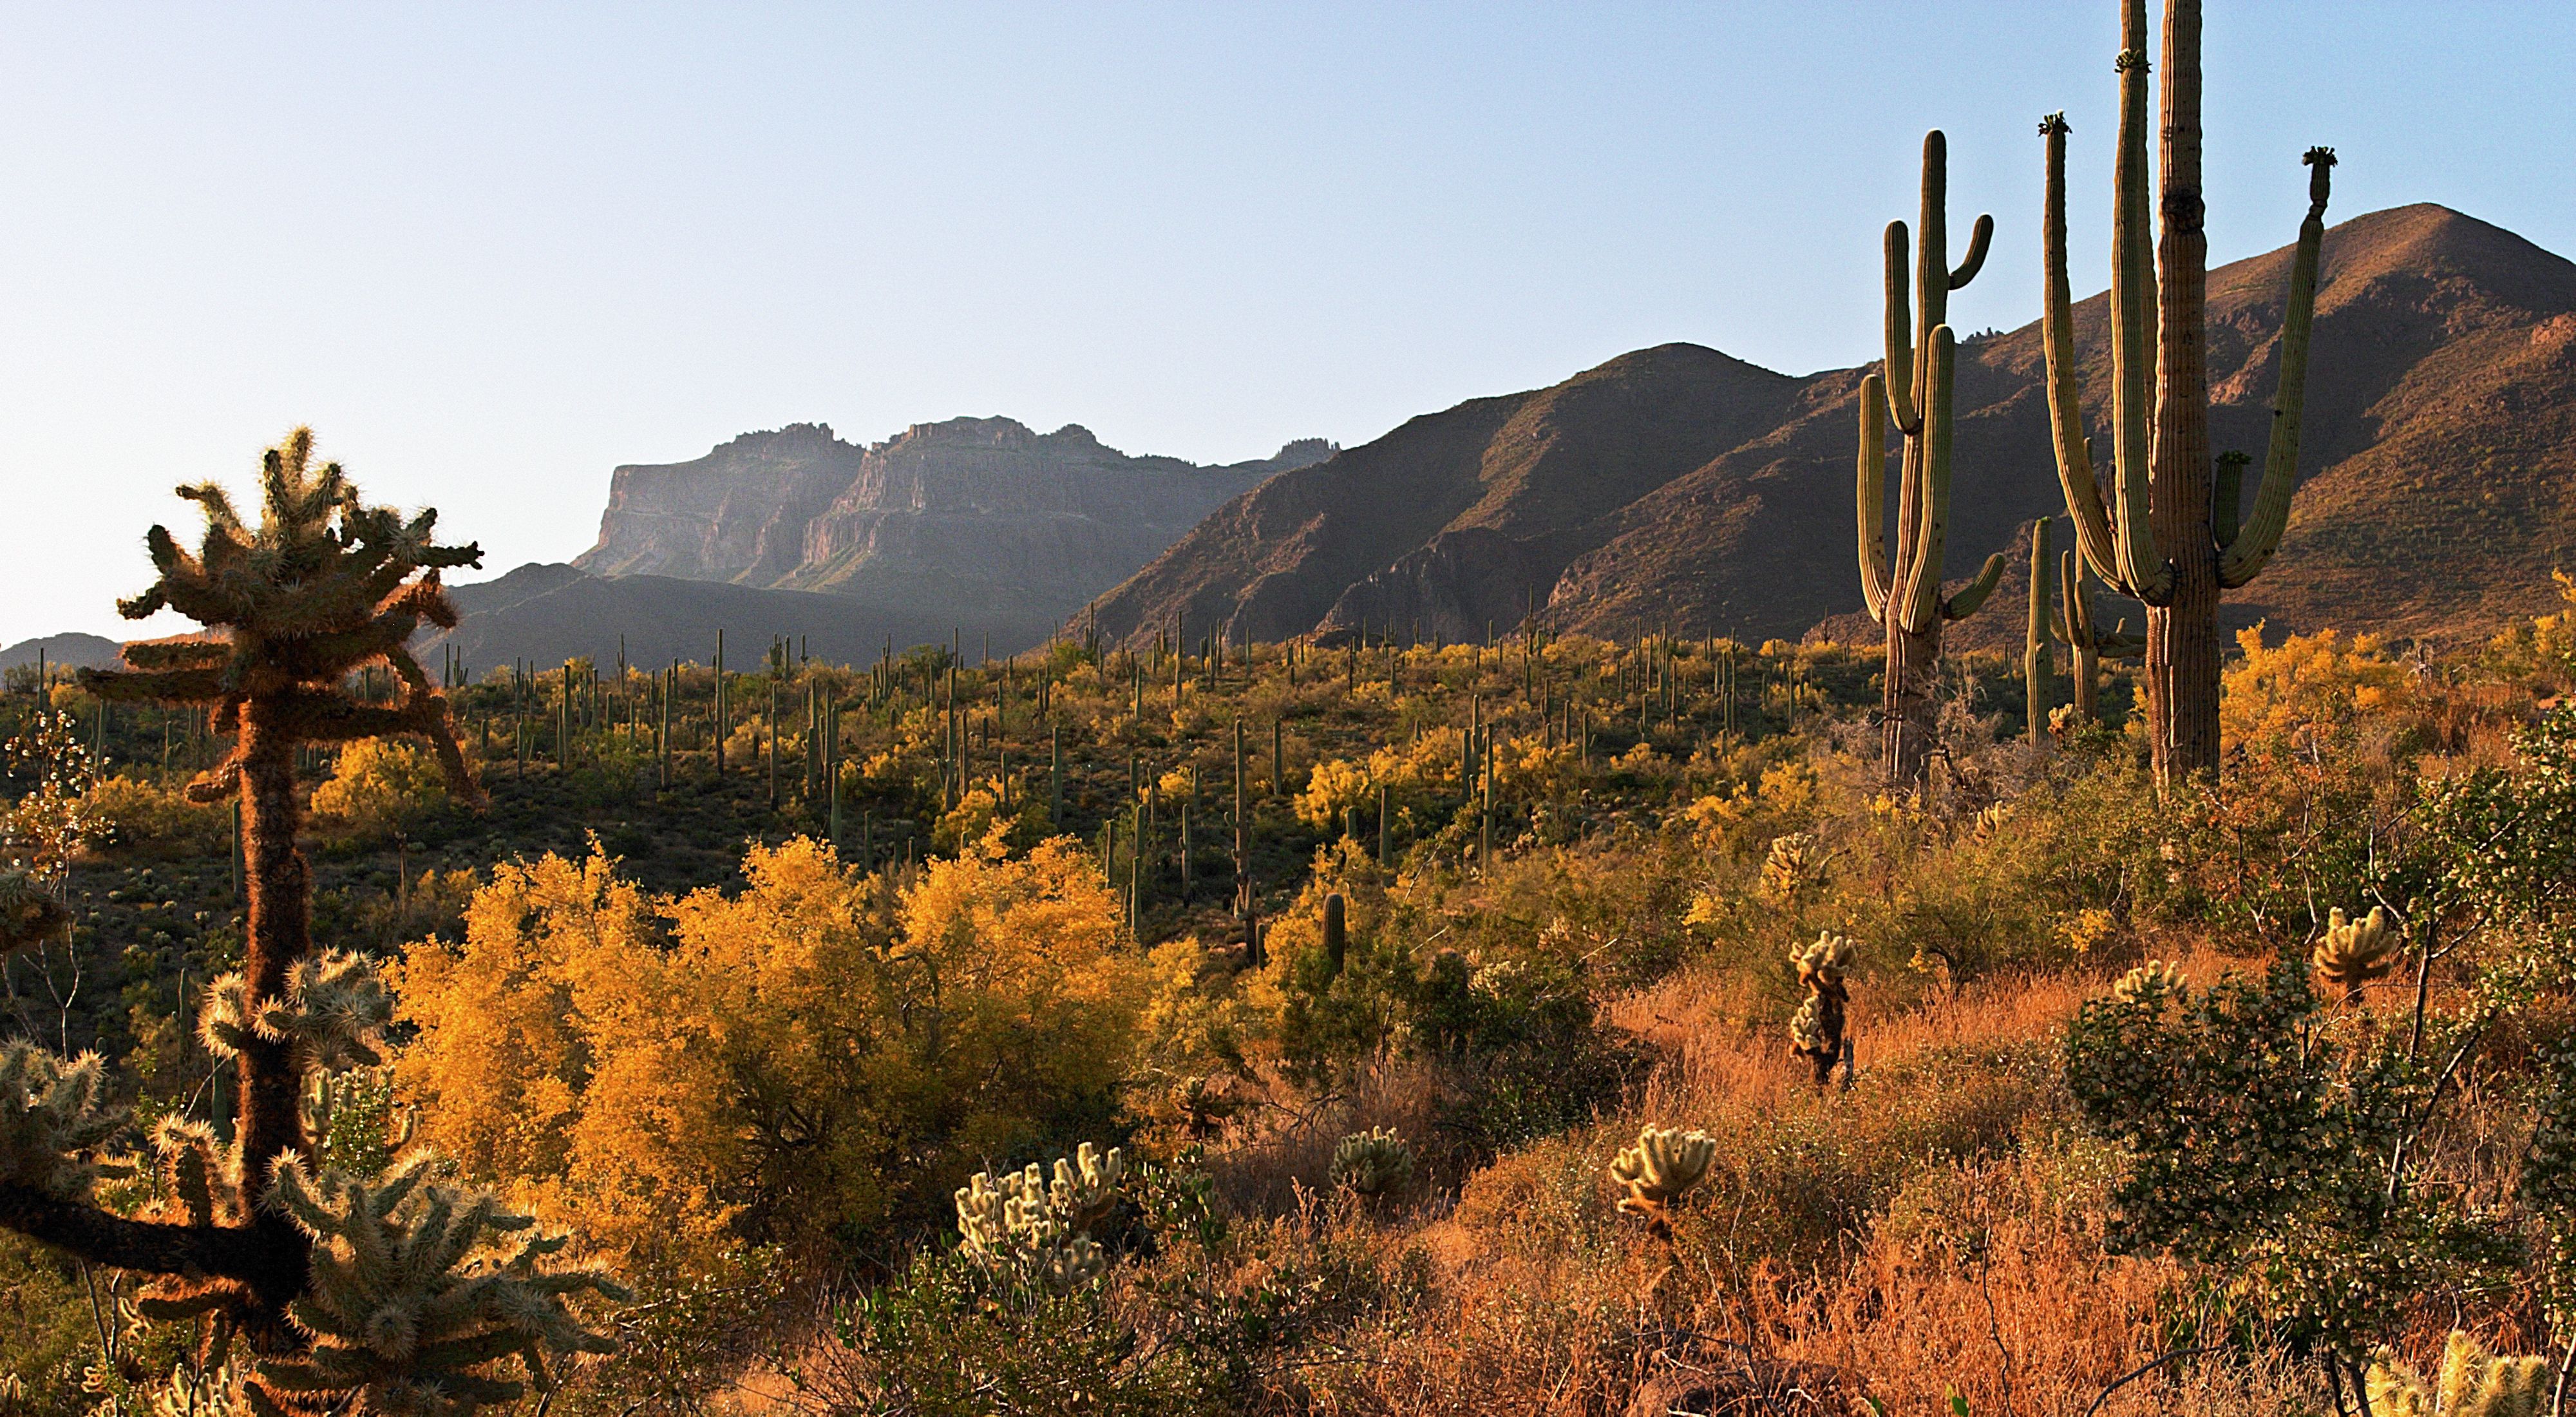 Landscape of cholla and saguaro cactus with mountains in the background.